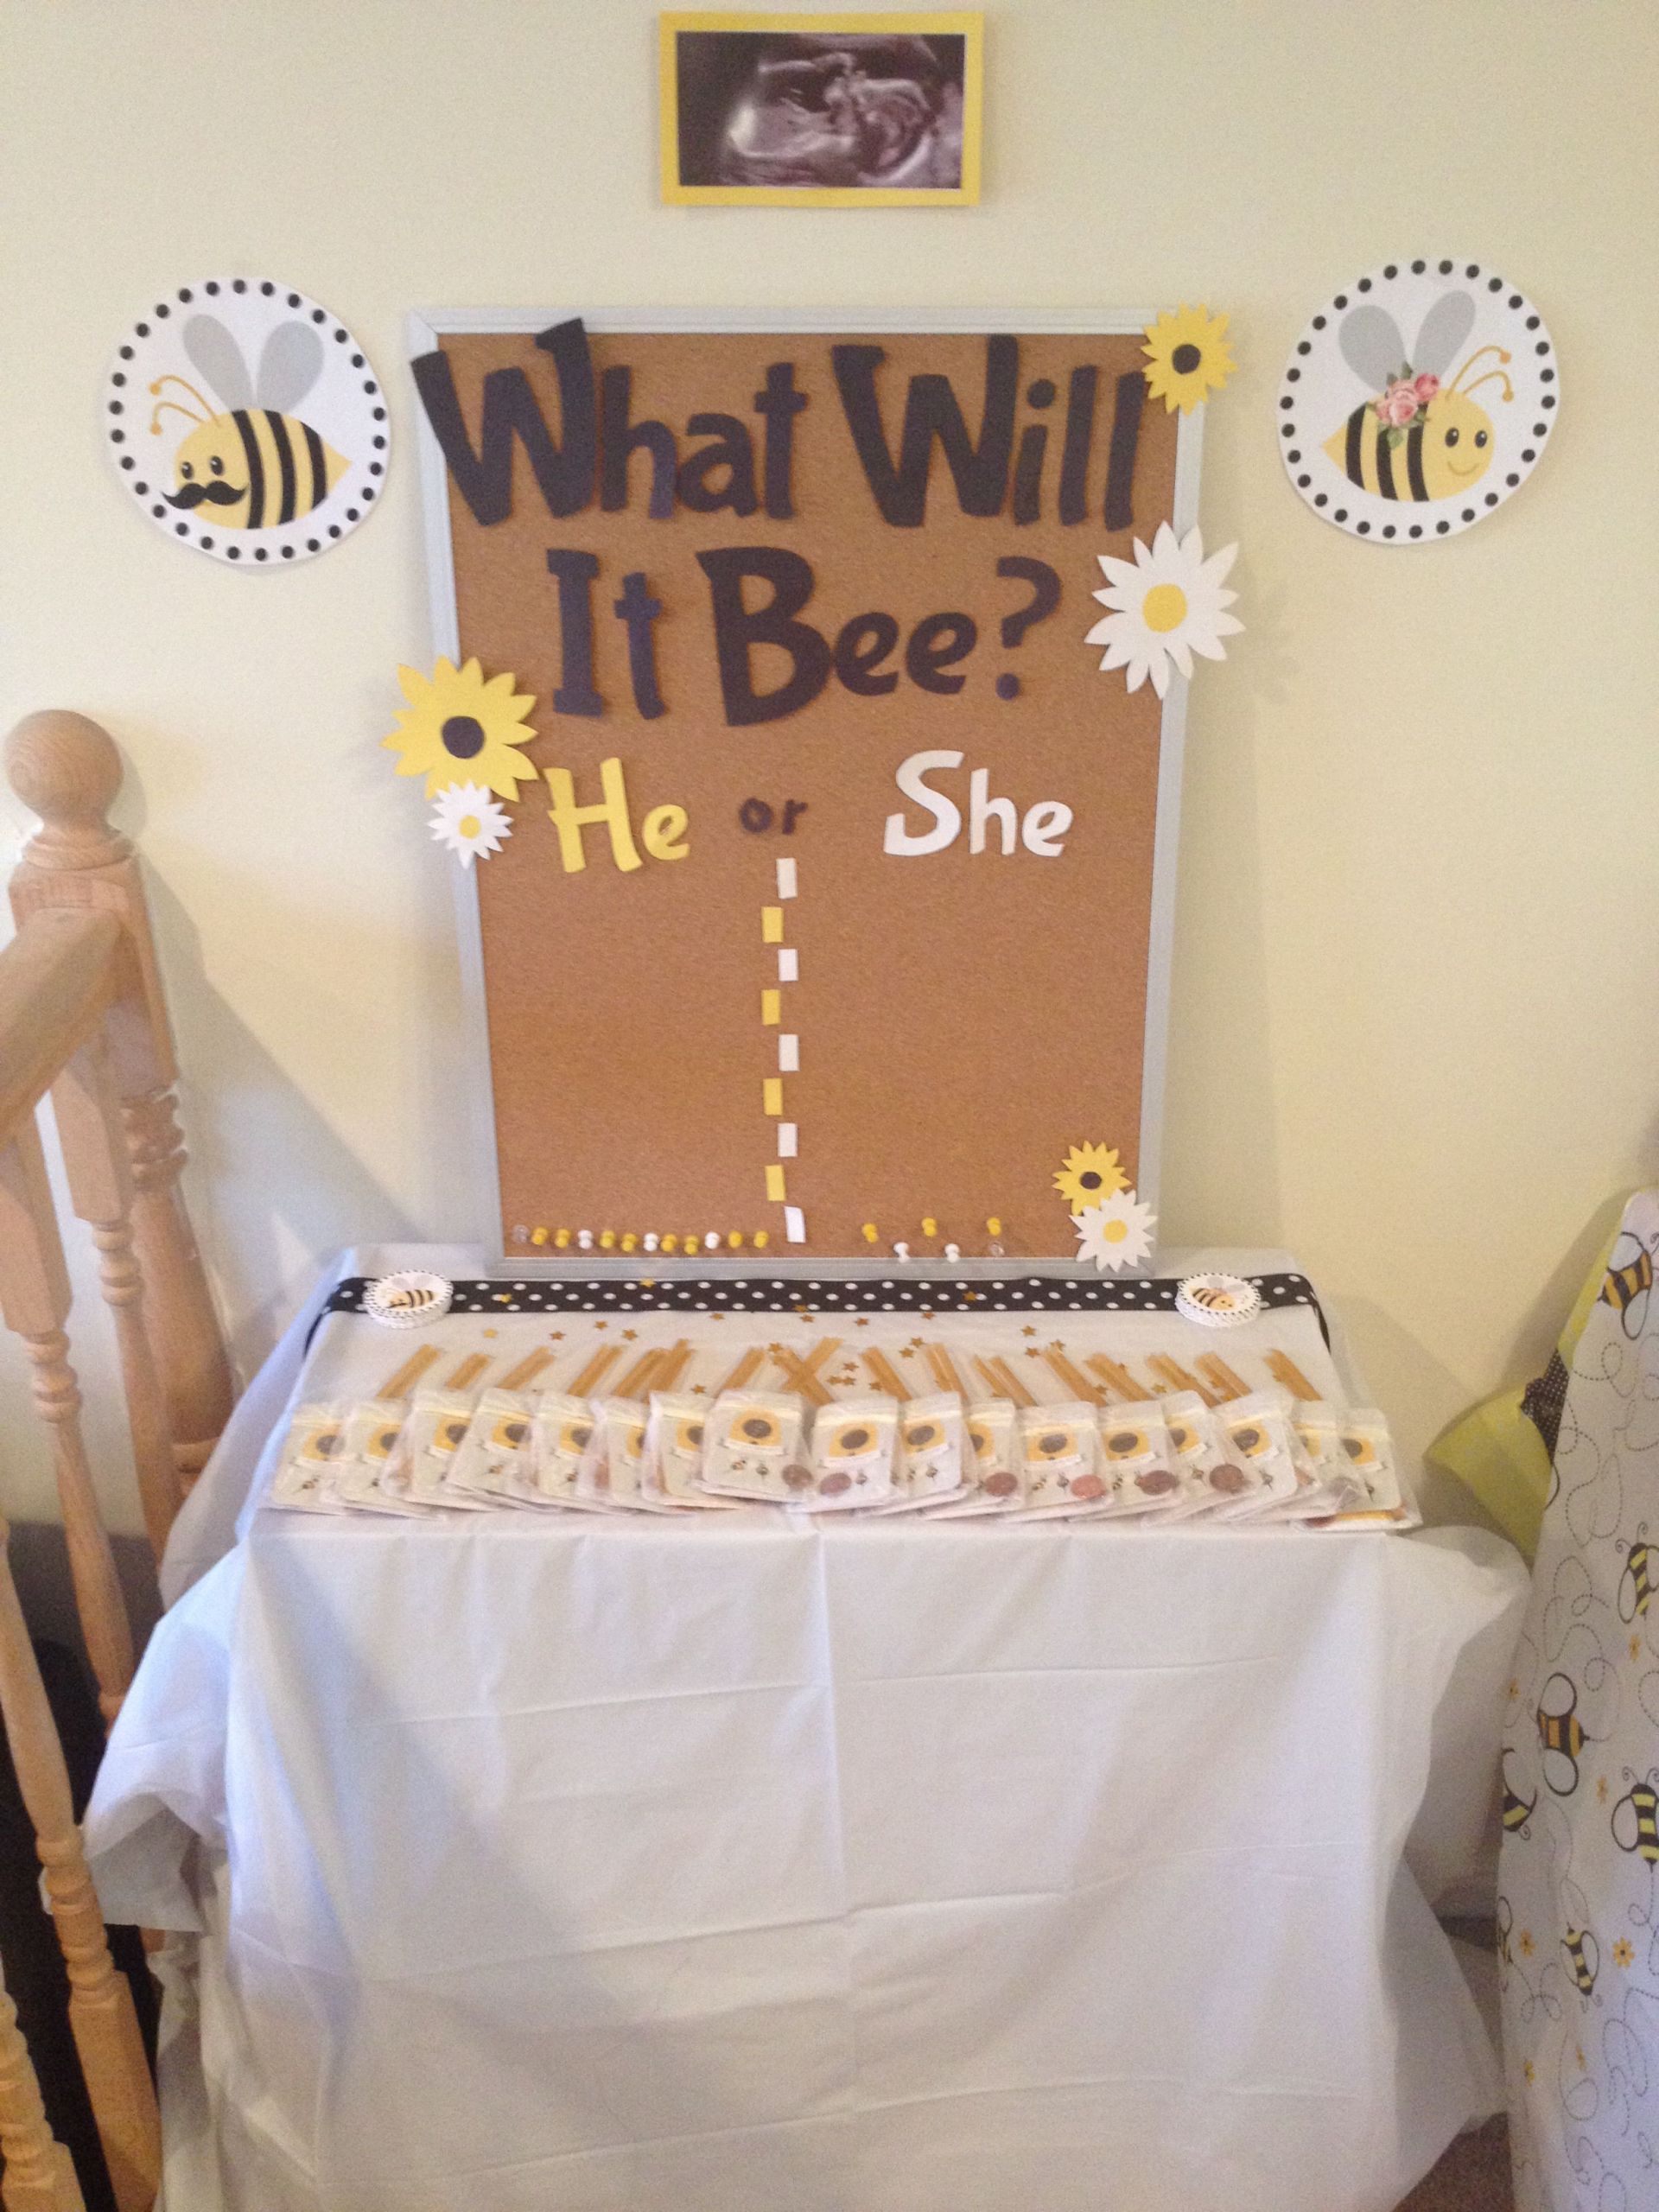 What Will It Bee Gender Reveal Party Ideas
 "What will it bee " Gender Reveal Party in 2019